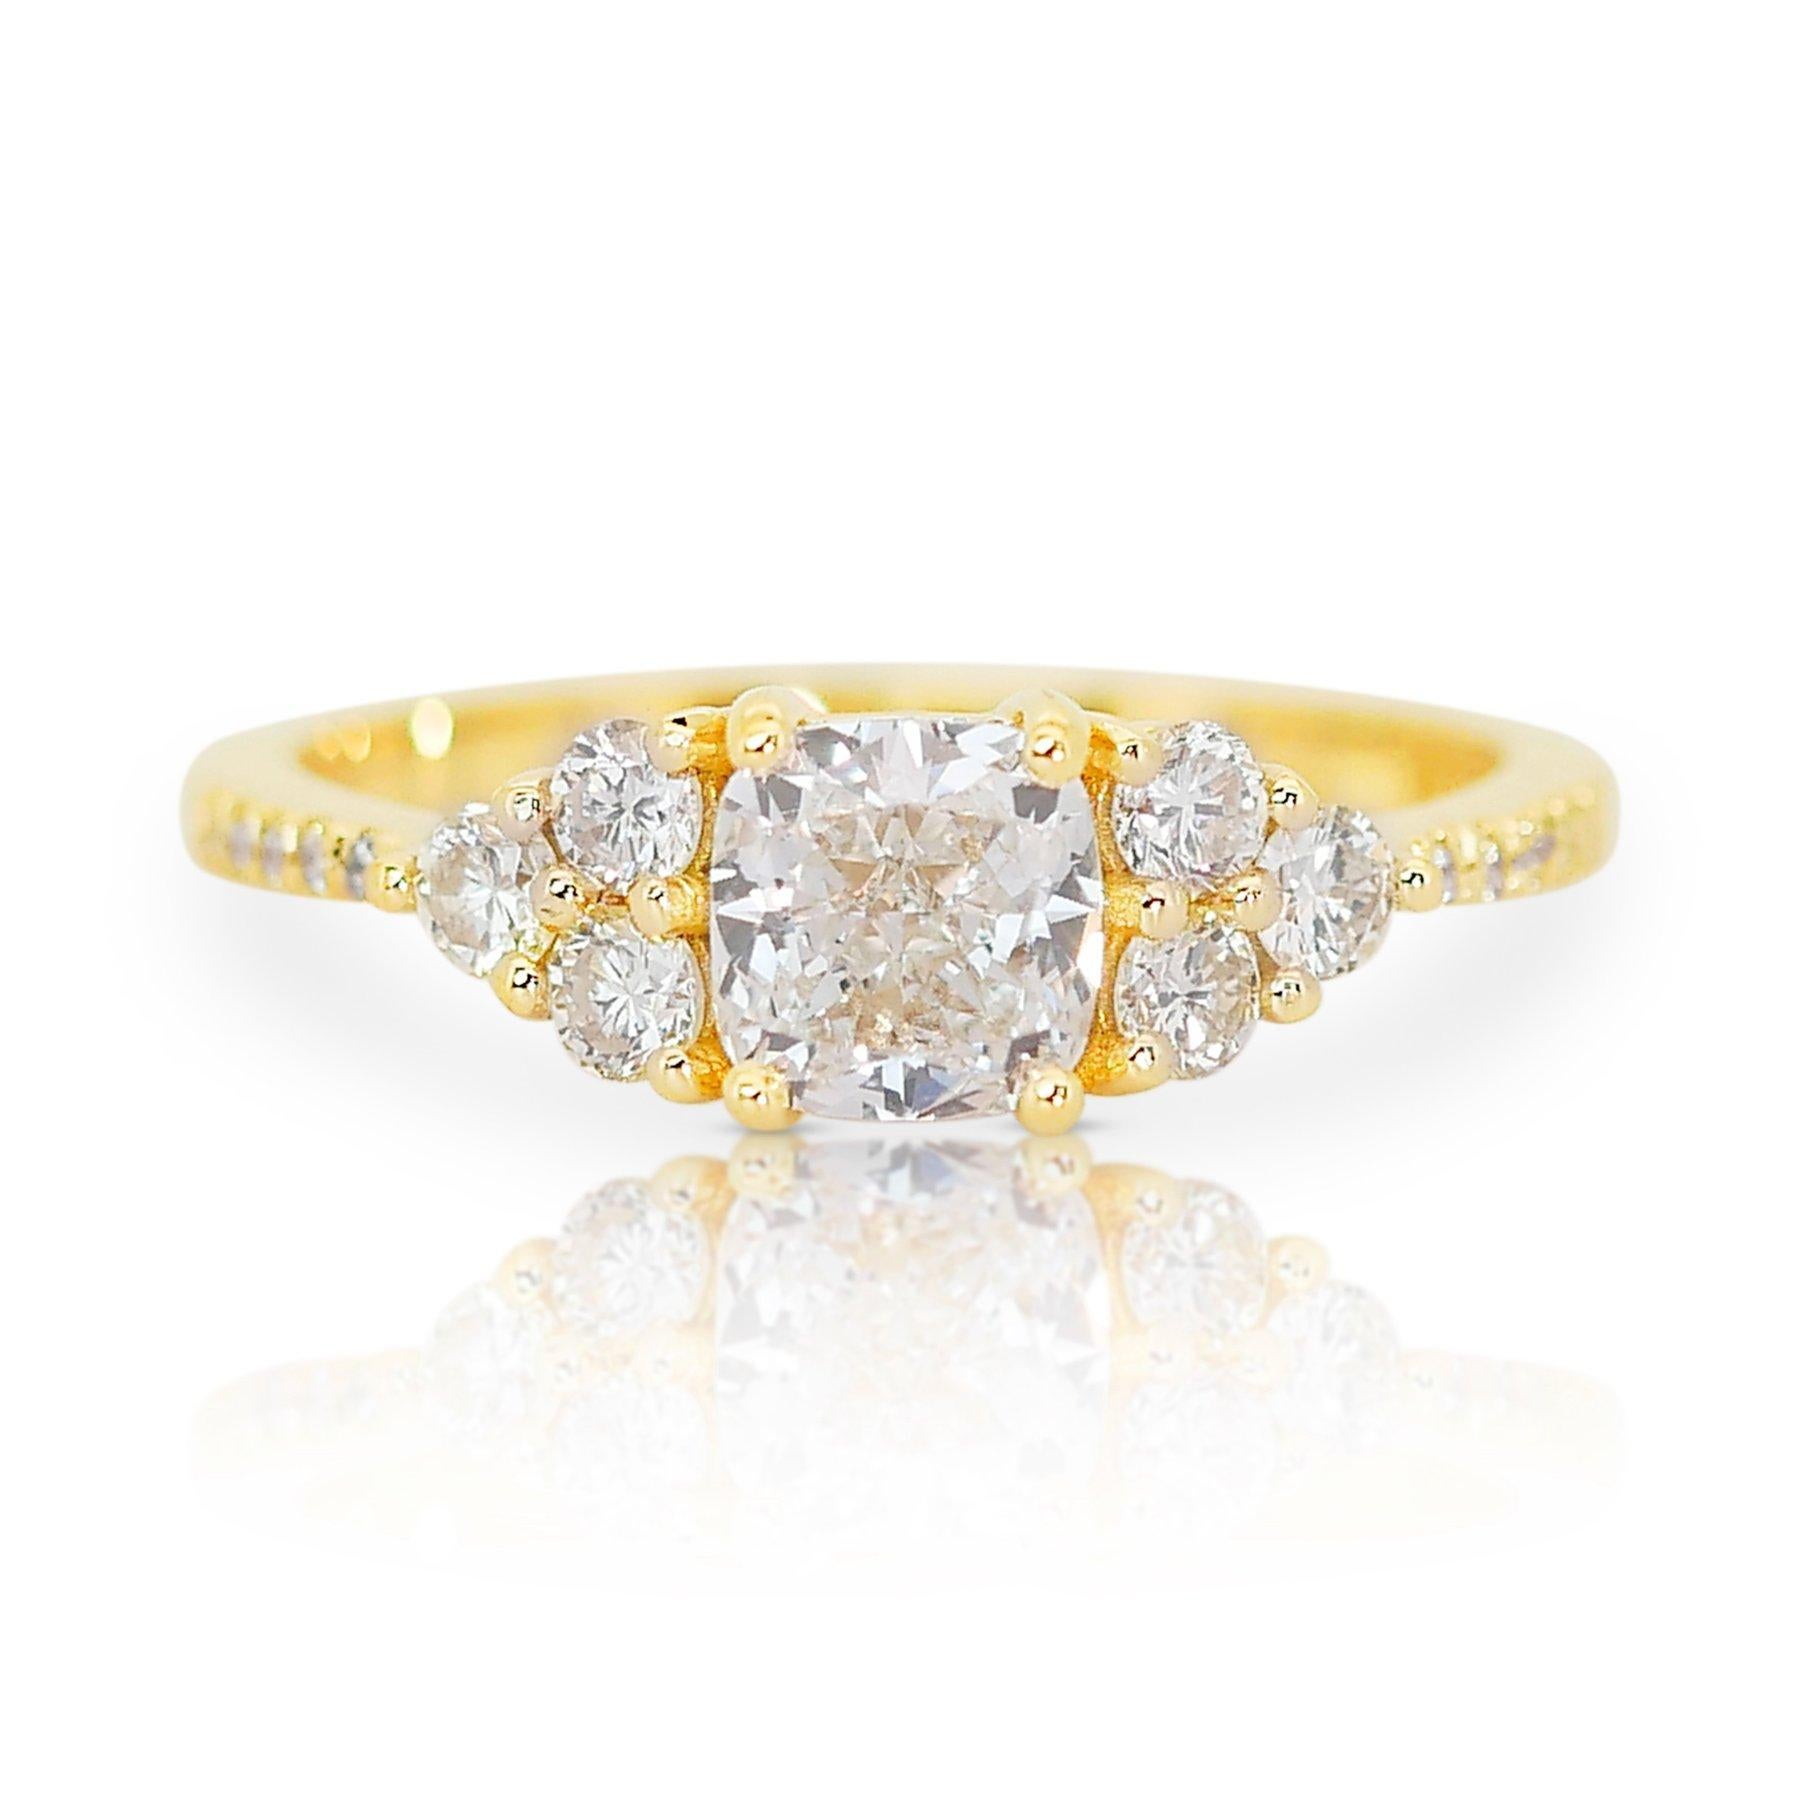 Lustrous 1.32ct Diamond Pave Ring in 18k Yellow Gold - GIA Certified 3